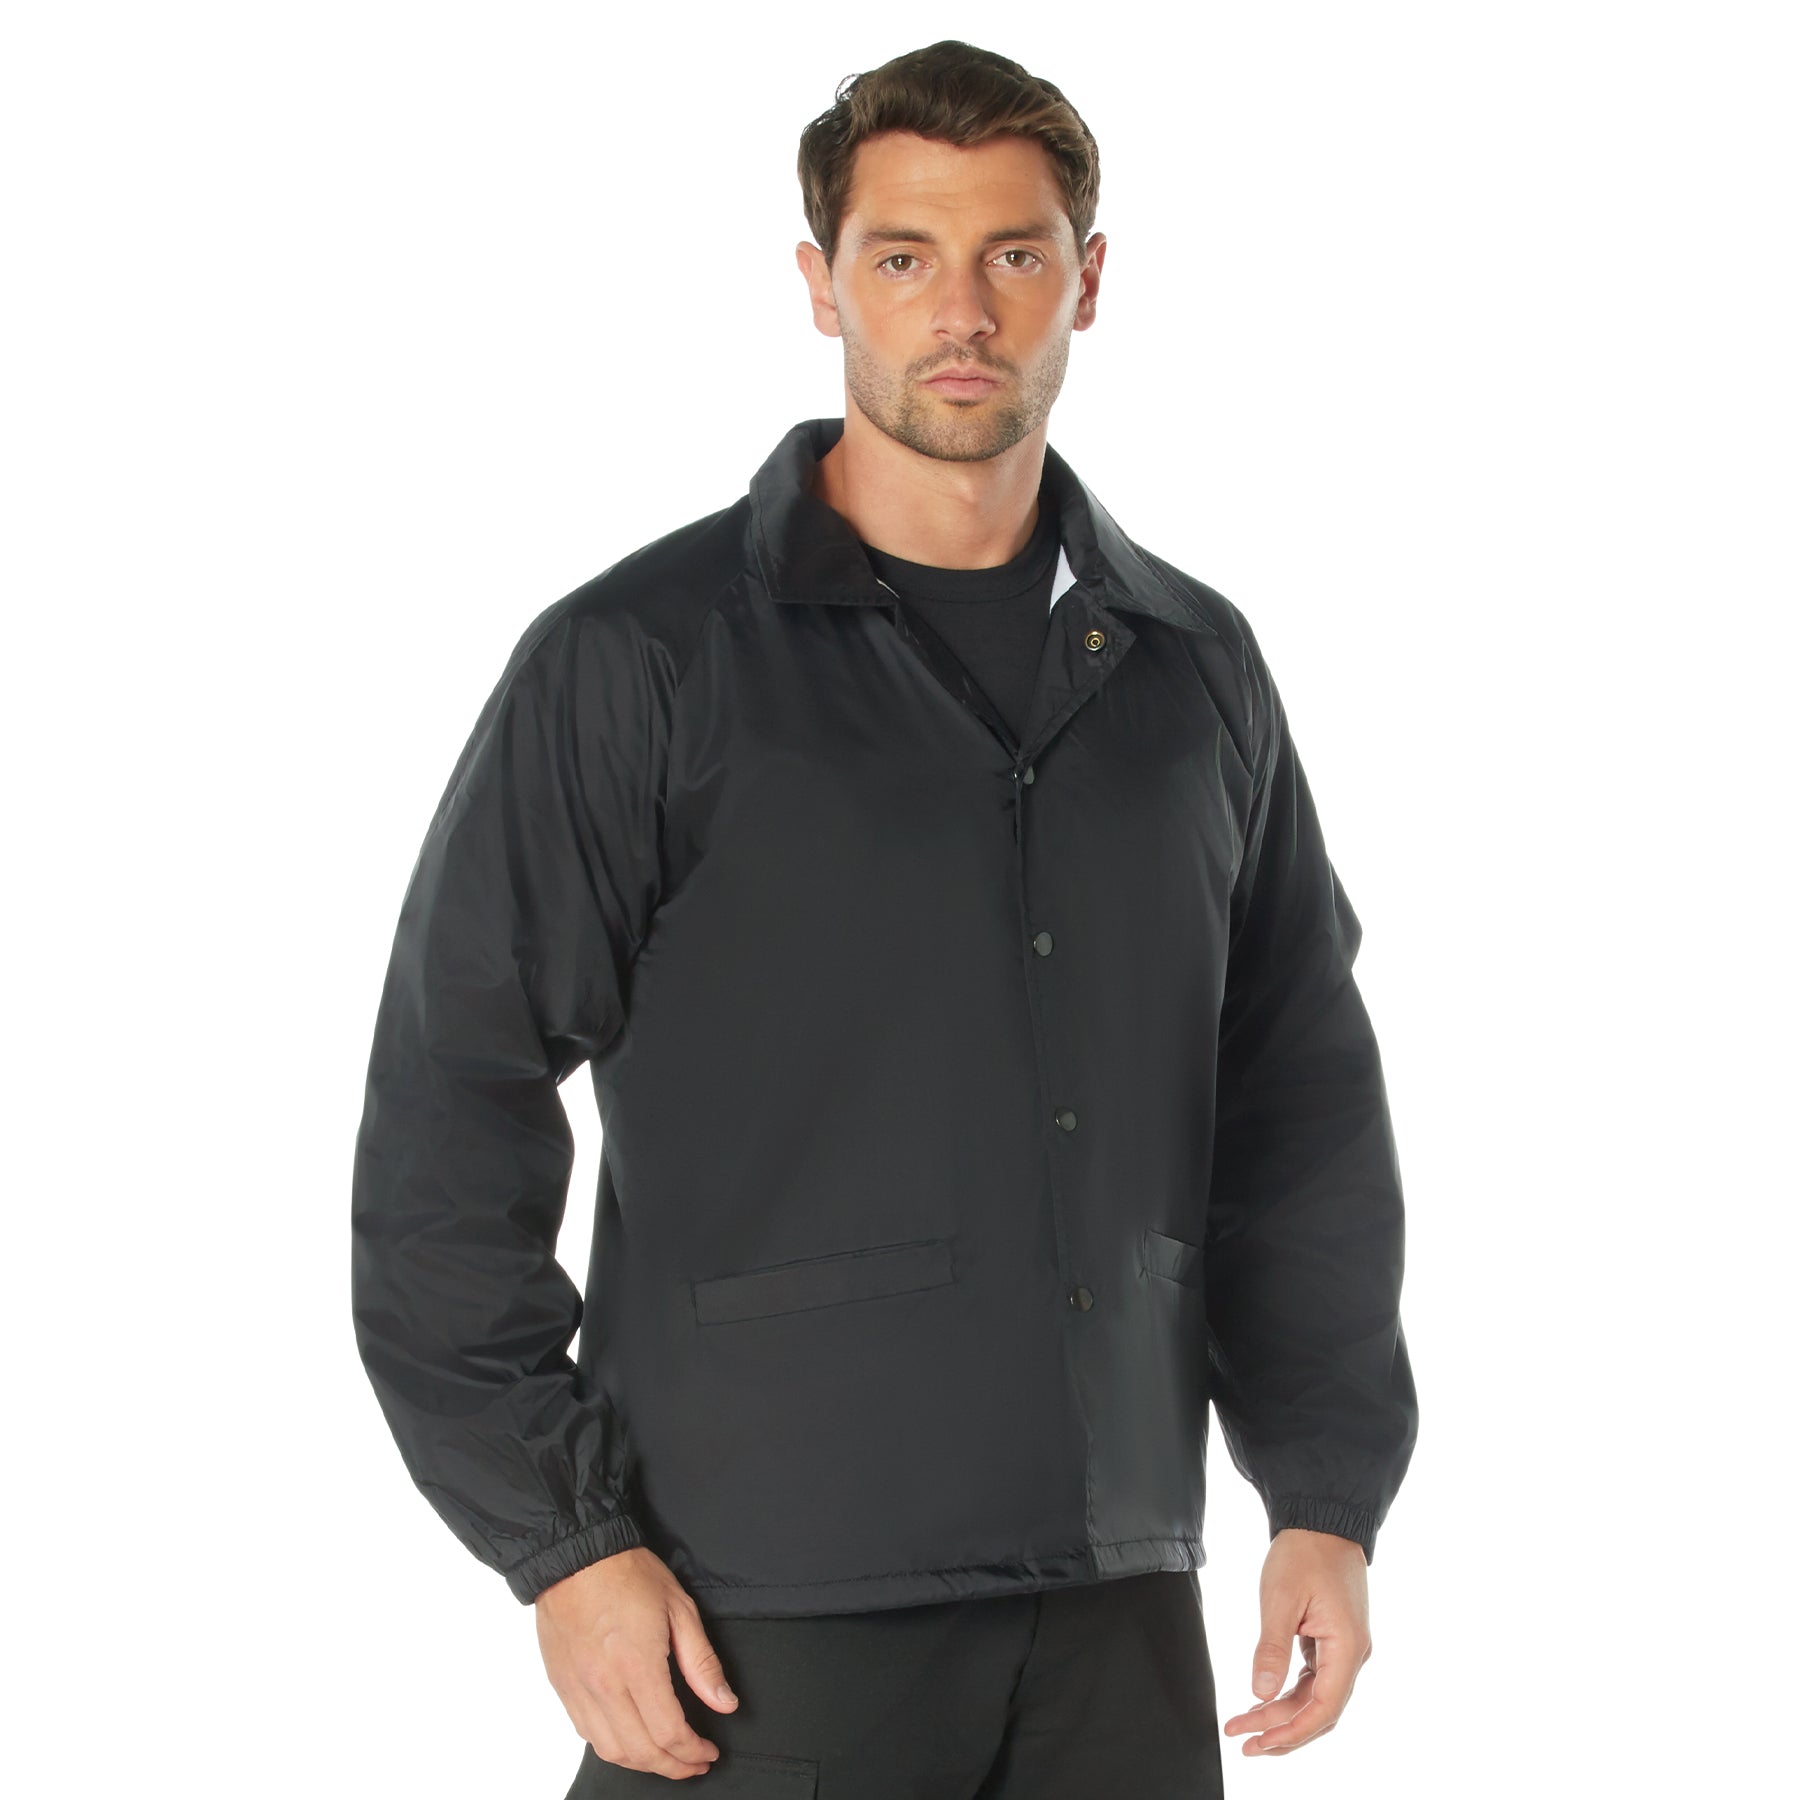 Rothco Lined Coaches Security Jacket - Tactical Choice Plus